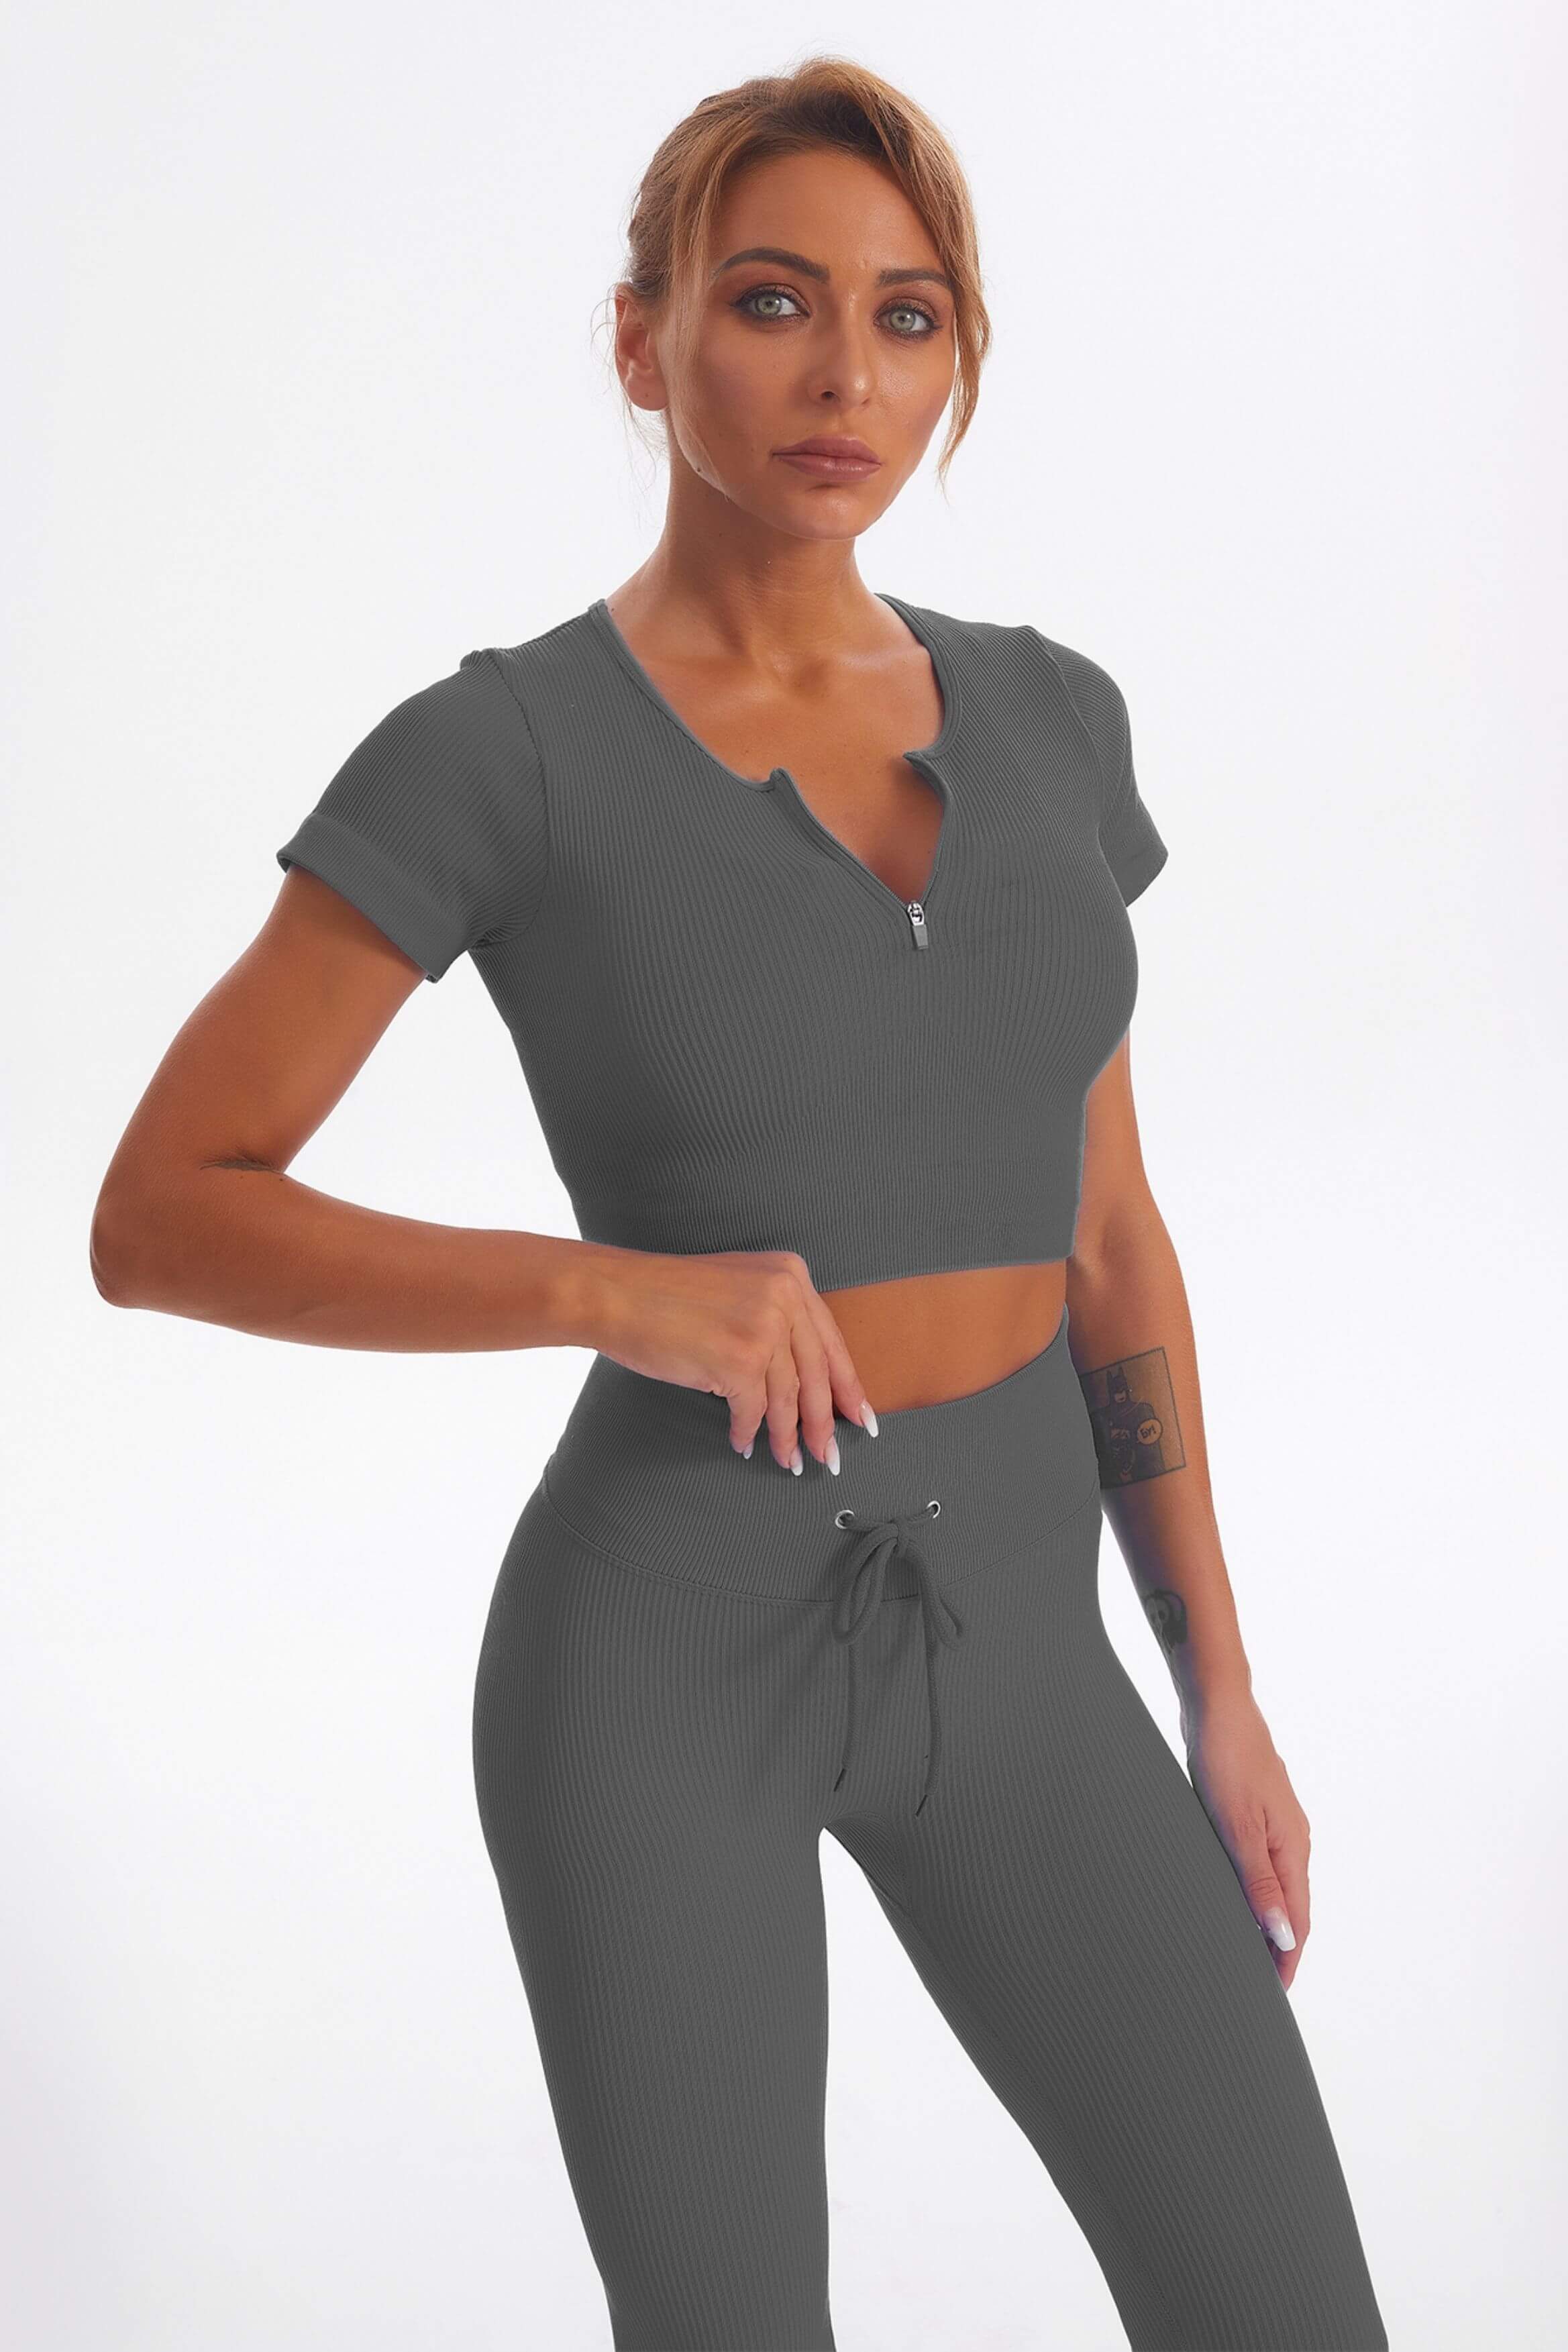 Grey And Charcoal Two Pack Washed Rib Seamless High Waist, 54% OFF